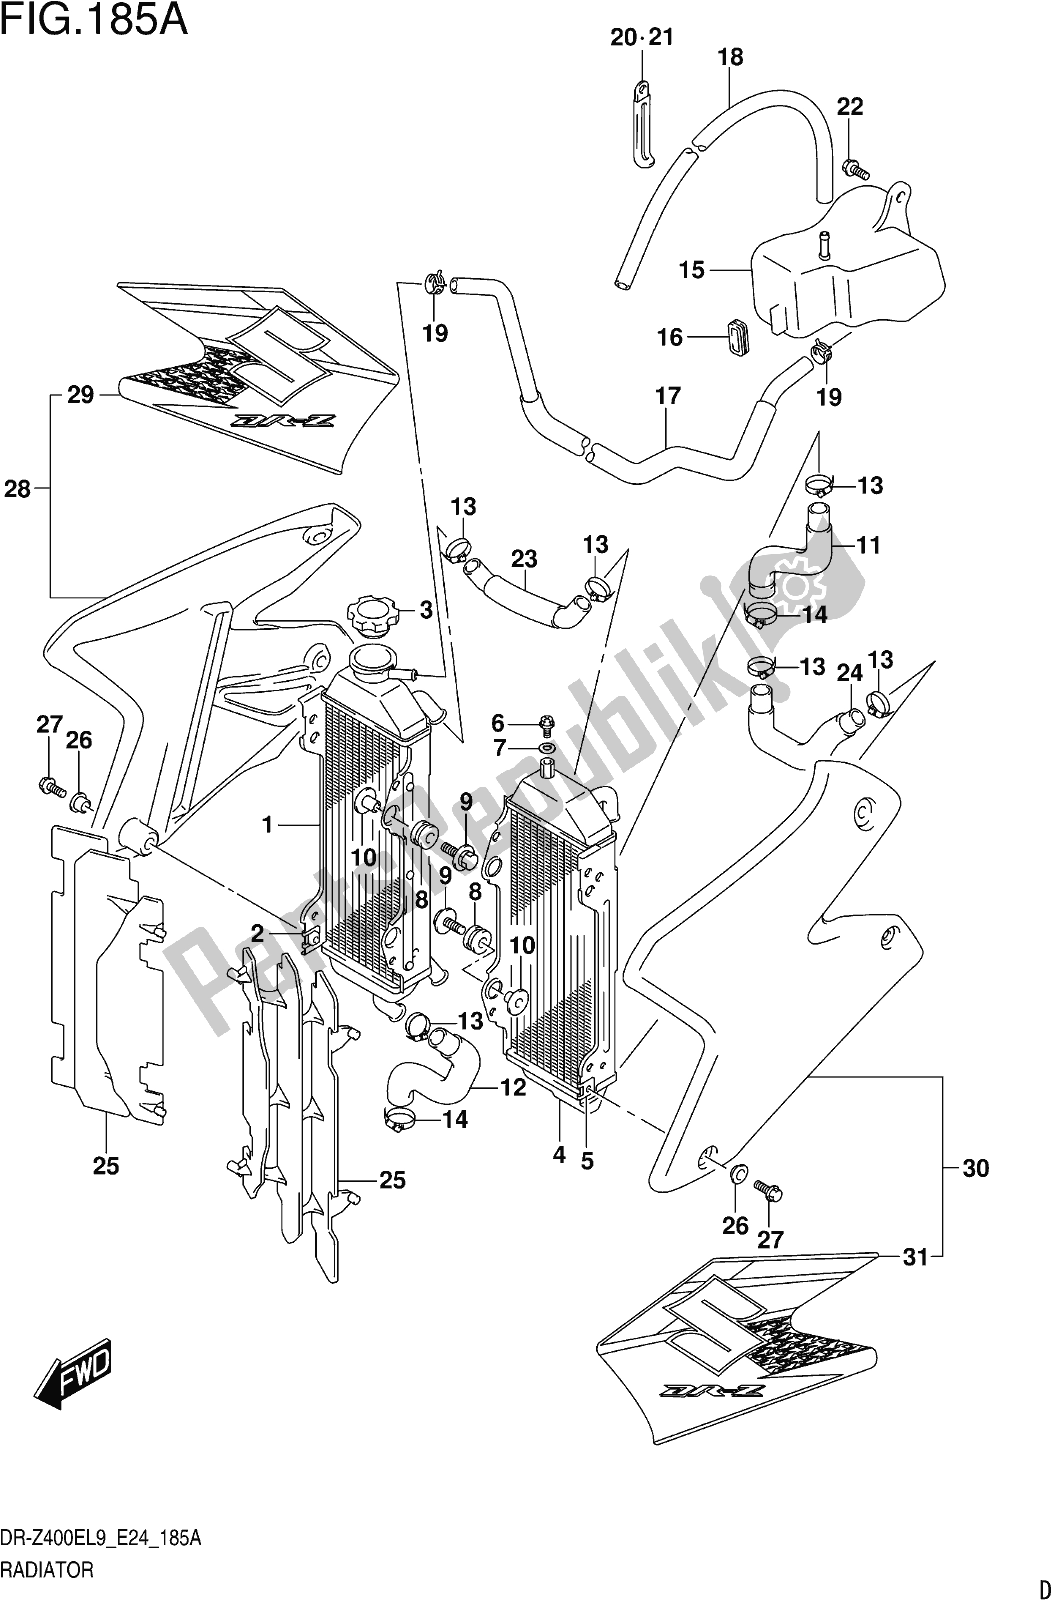 All parts for the Fig. 185a Radiator of the Suzuki DR-Z 400E 2019